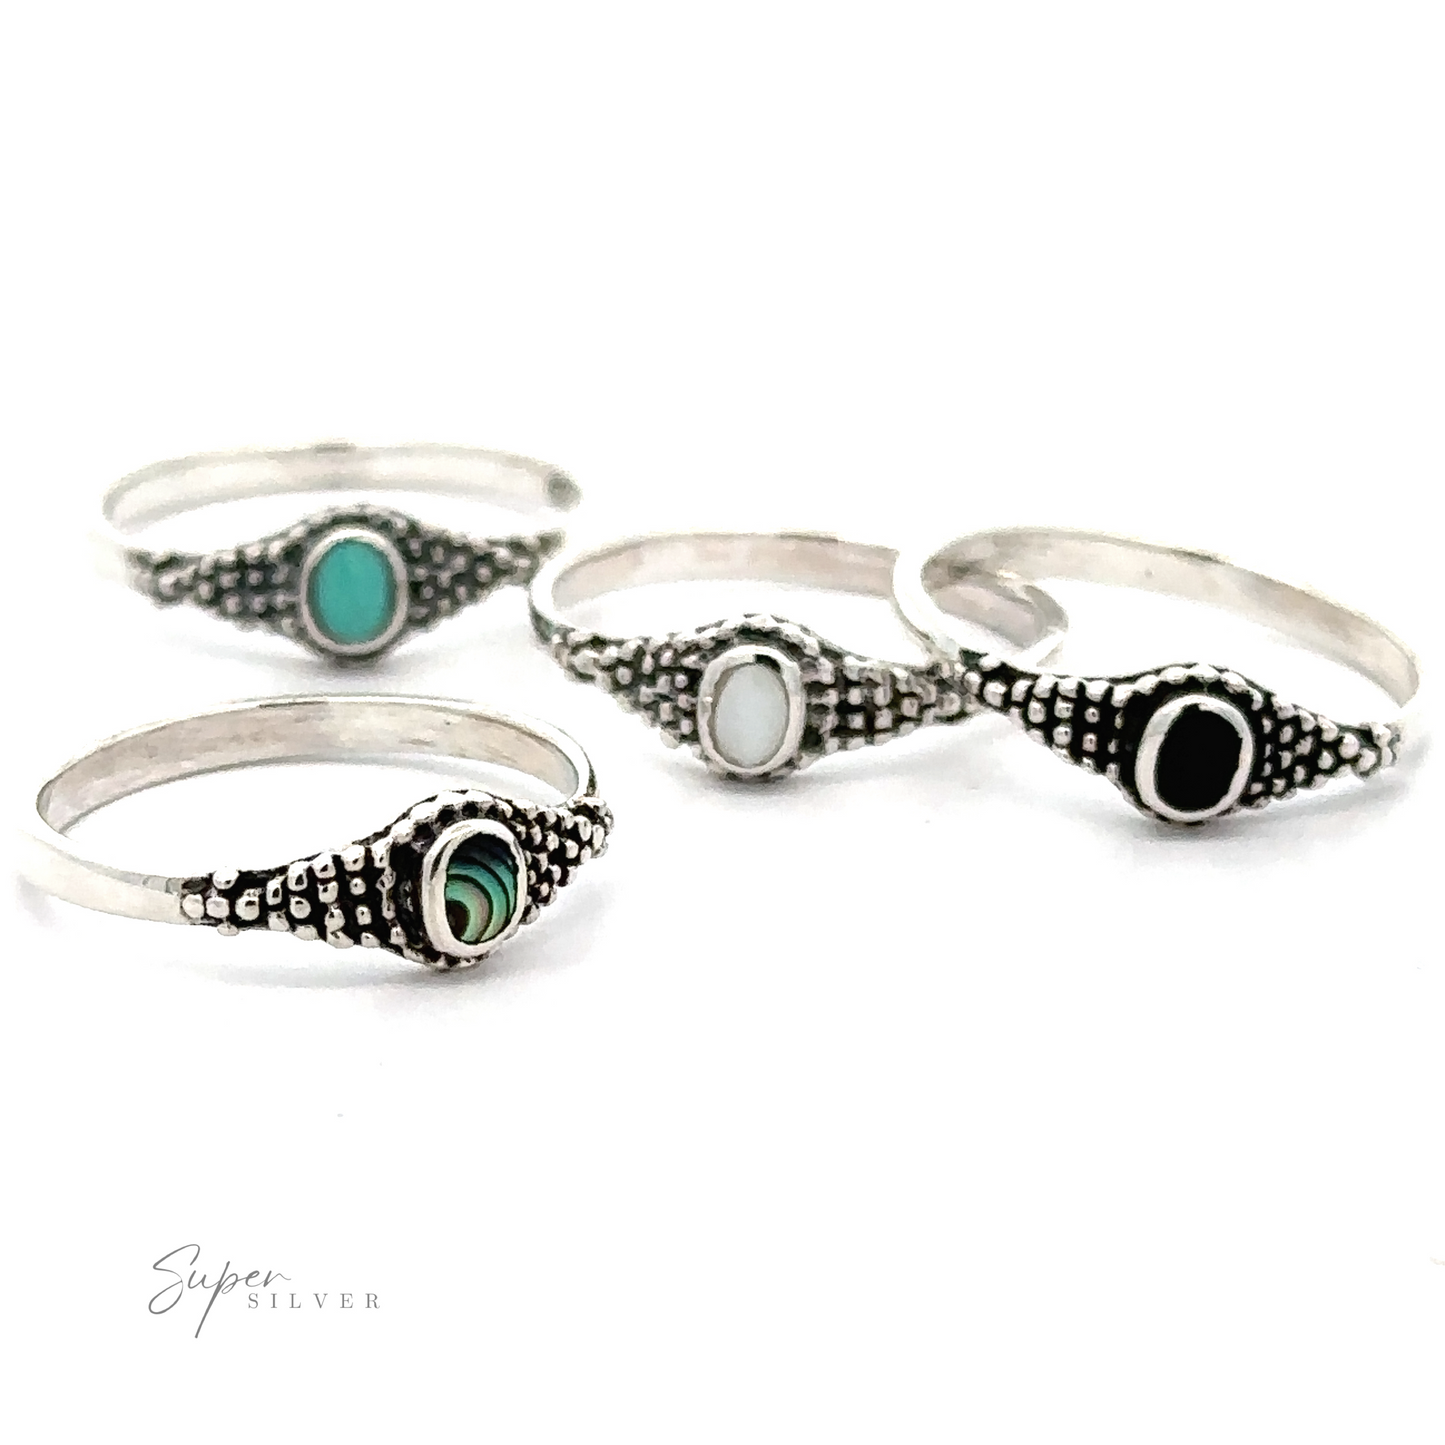 Four Dainty Inlaid Rings with Beaded Texture, including abalone and Bali-style beading.